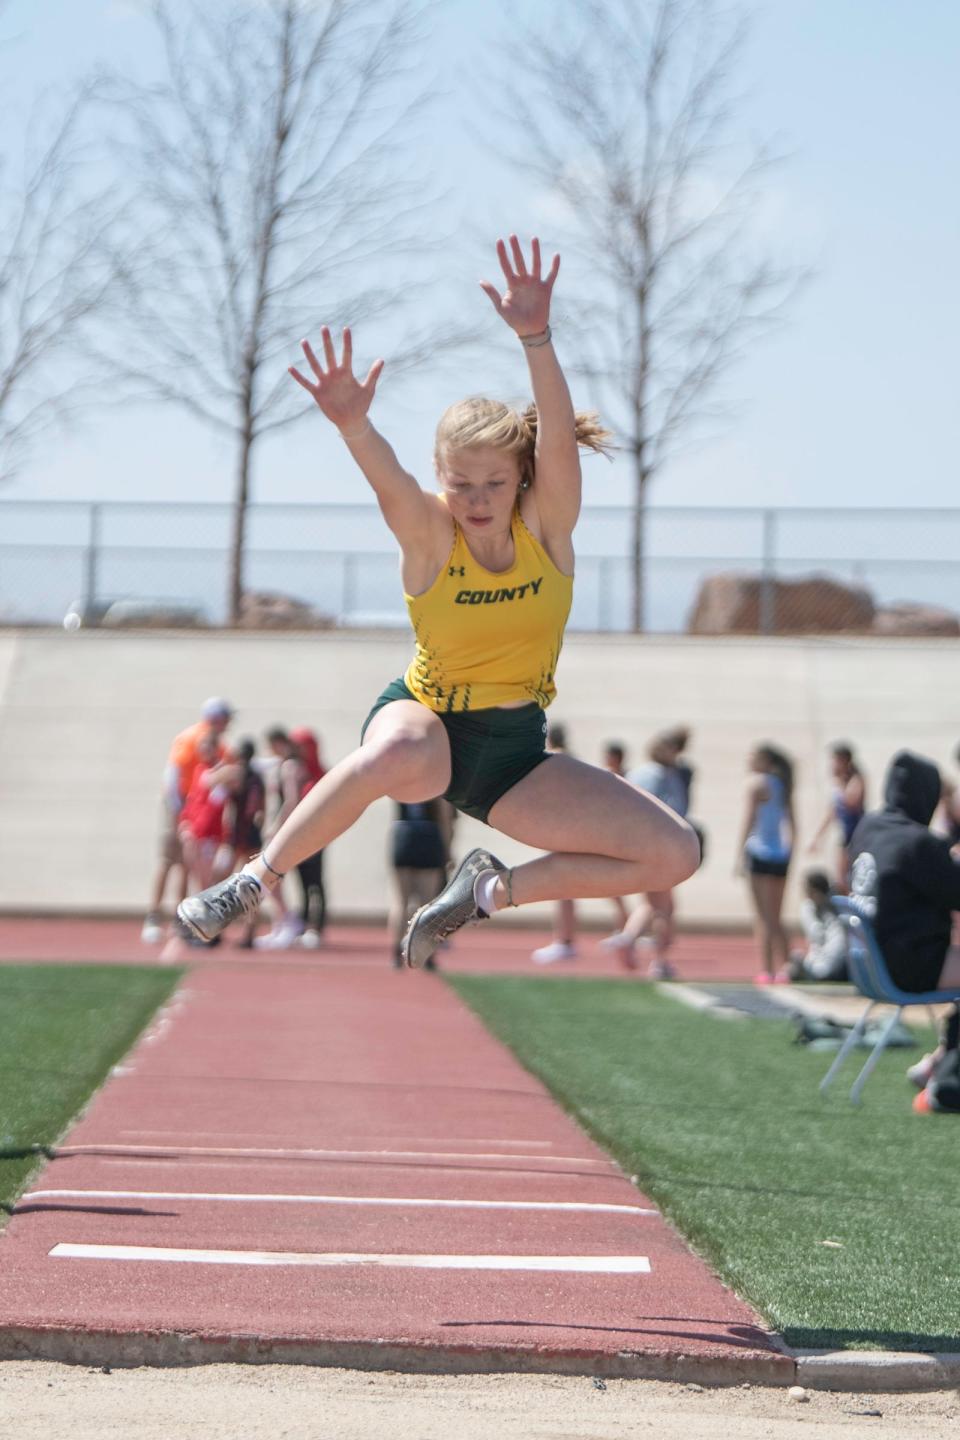 Pueblo County's Kyla Ruzich flys through the air while competing in the triple jump during a meet at Pueblo West High School on Thursday, March 30, 2023.